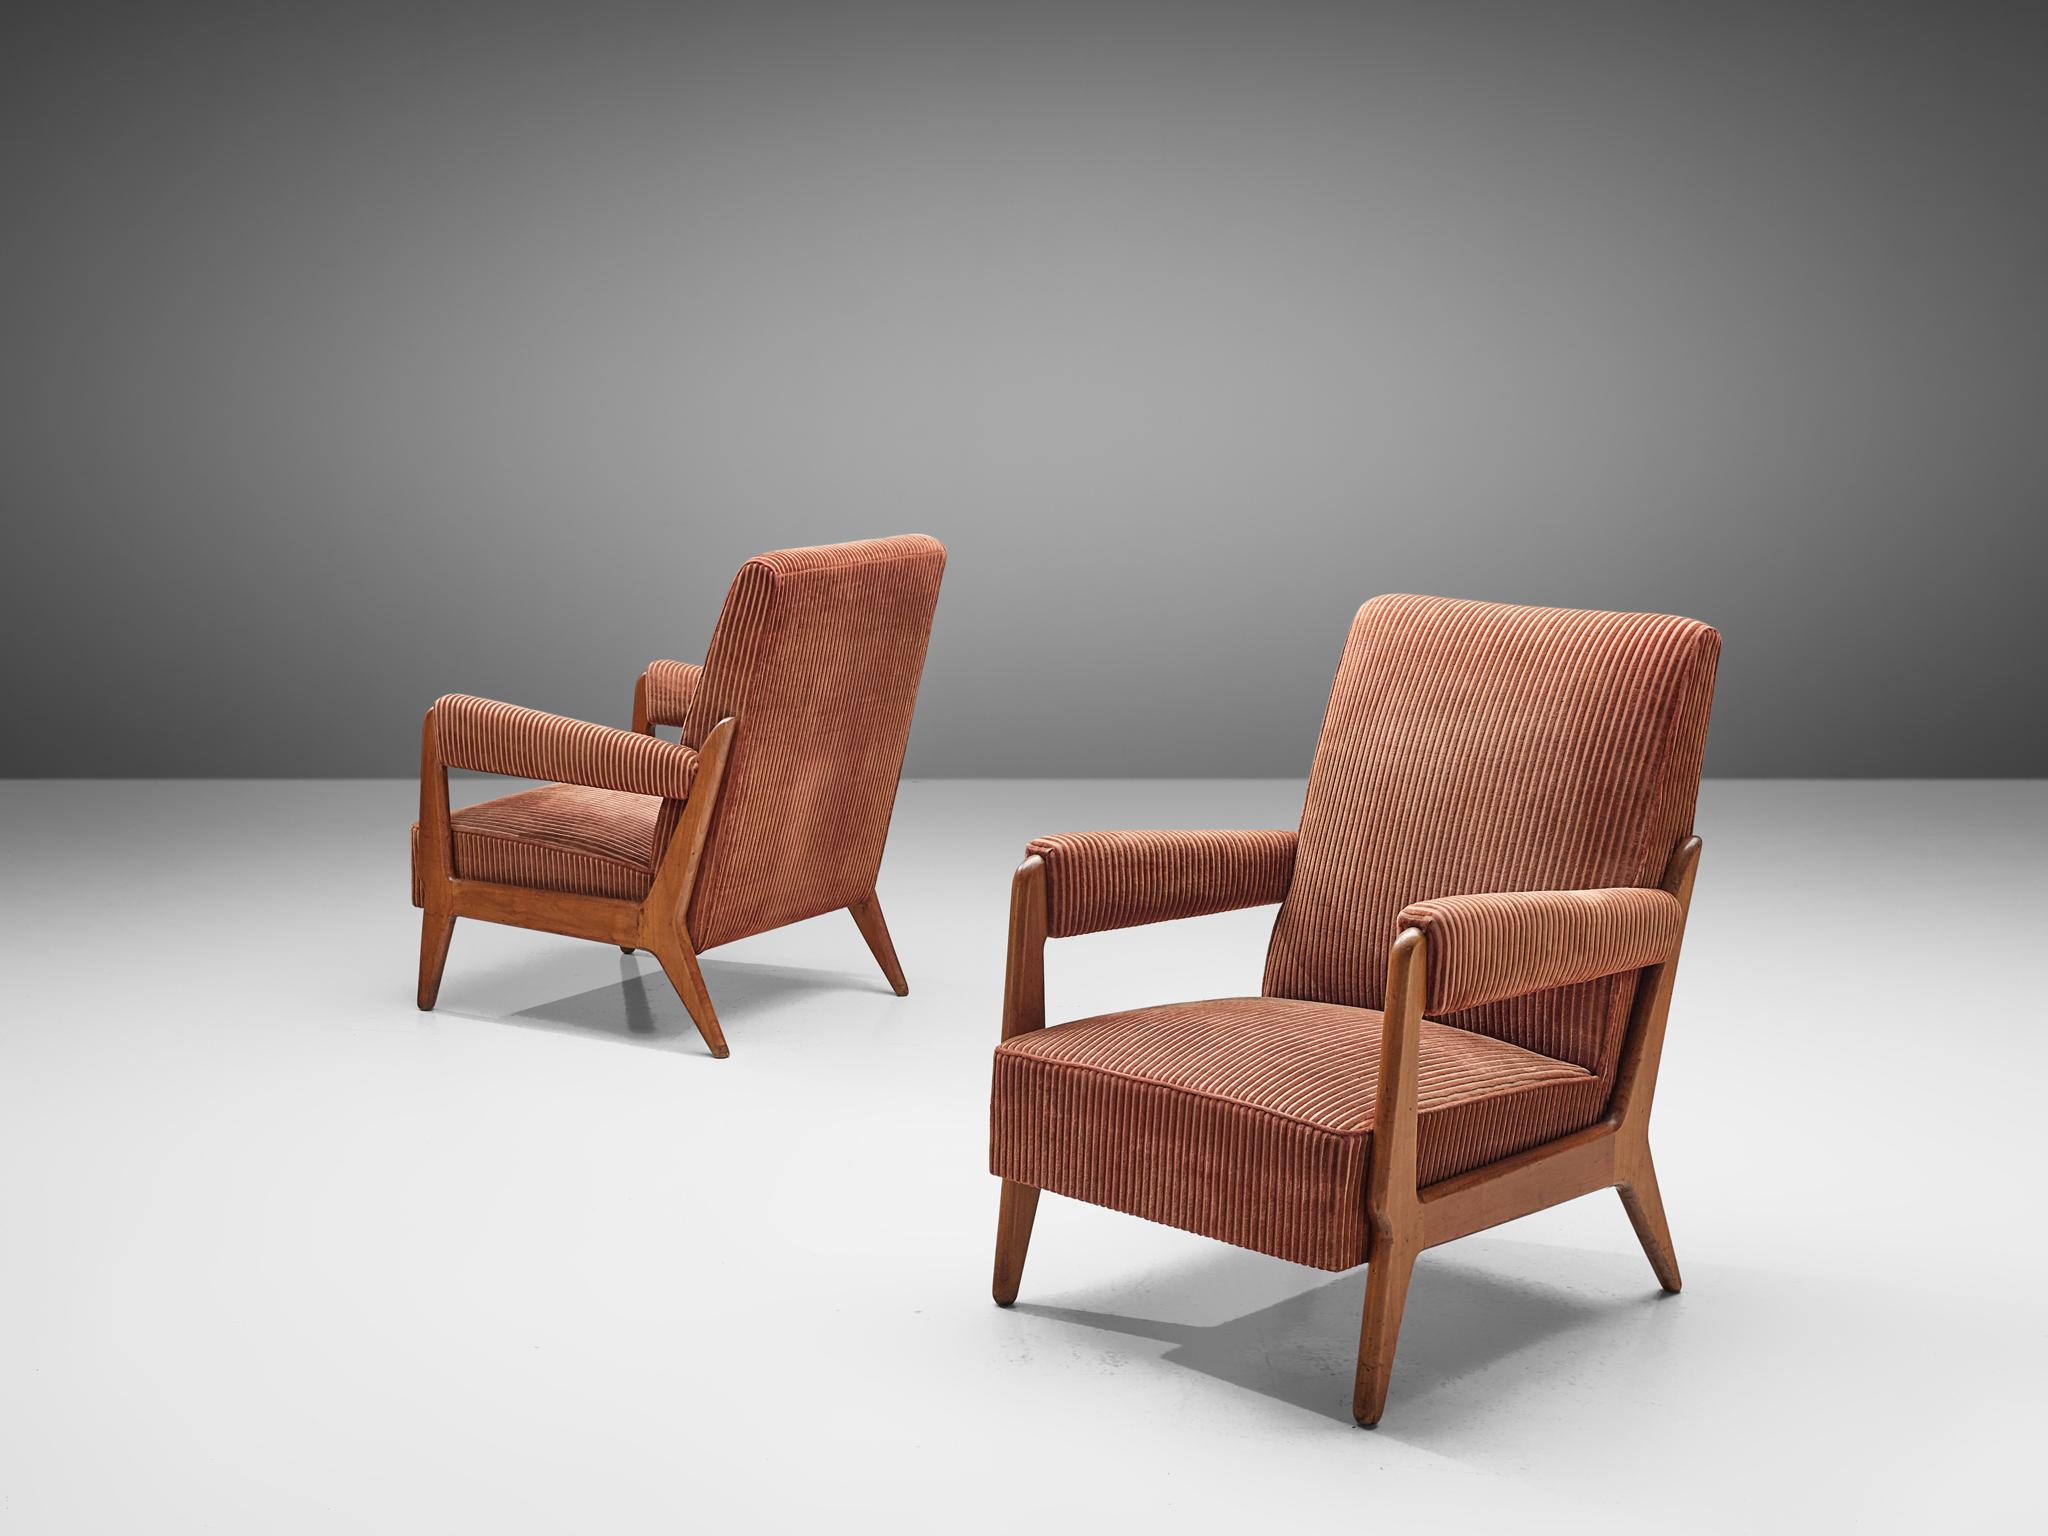 Pair of lounge chairs, ashwood, cord upholstery, France, 1950s
 
These elegant French armchairs are currently upholstered in soft pink cord upholstery that combines beautifully with the ashwood frame. The high backrest is slightly tilted, the